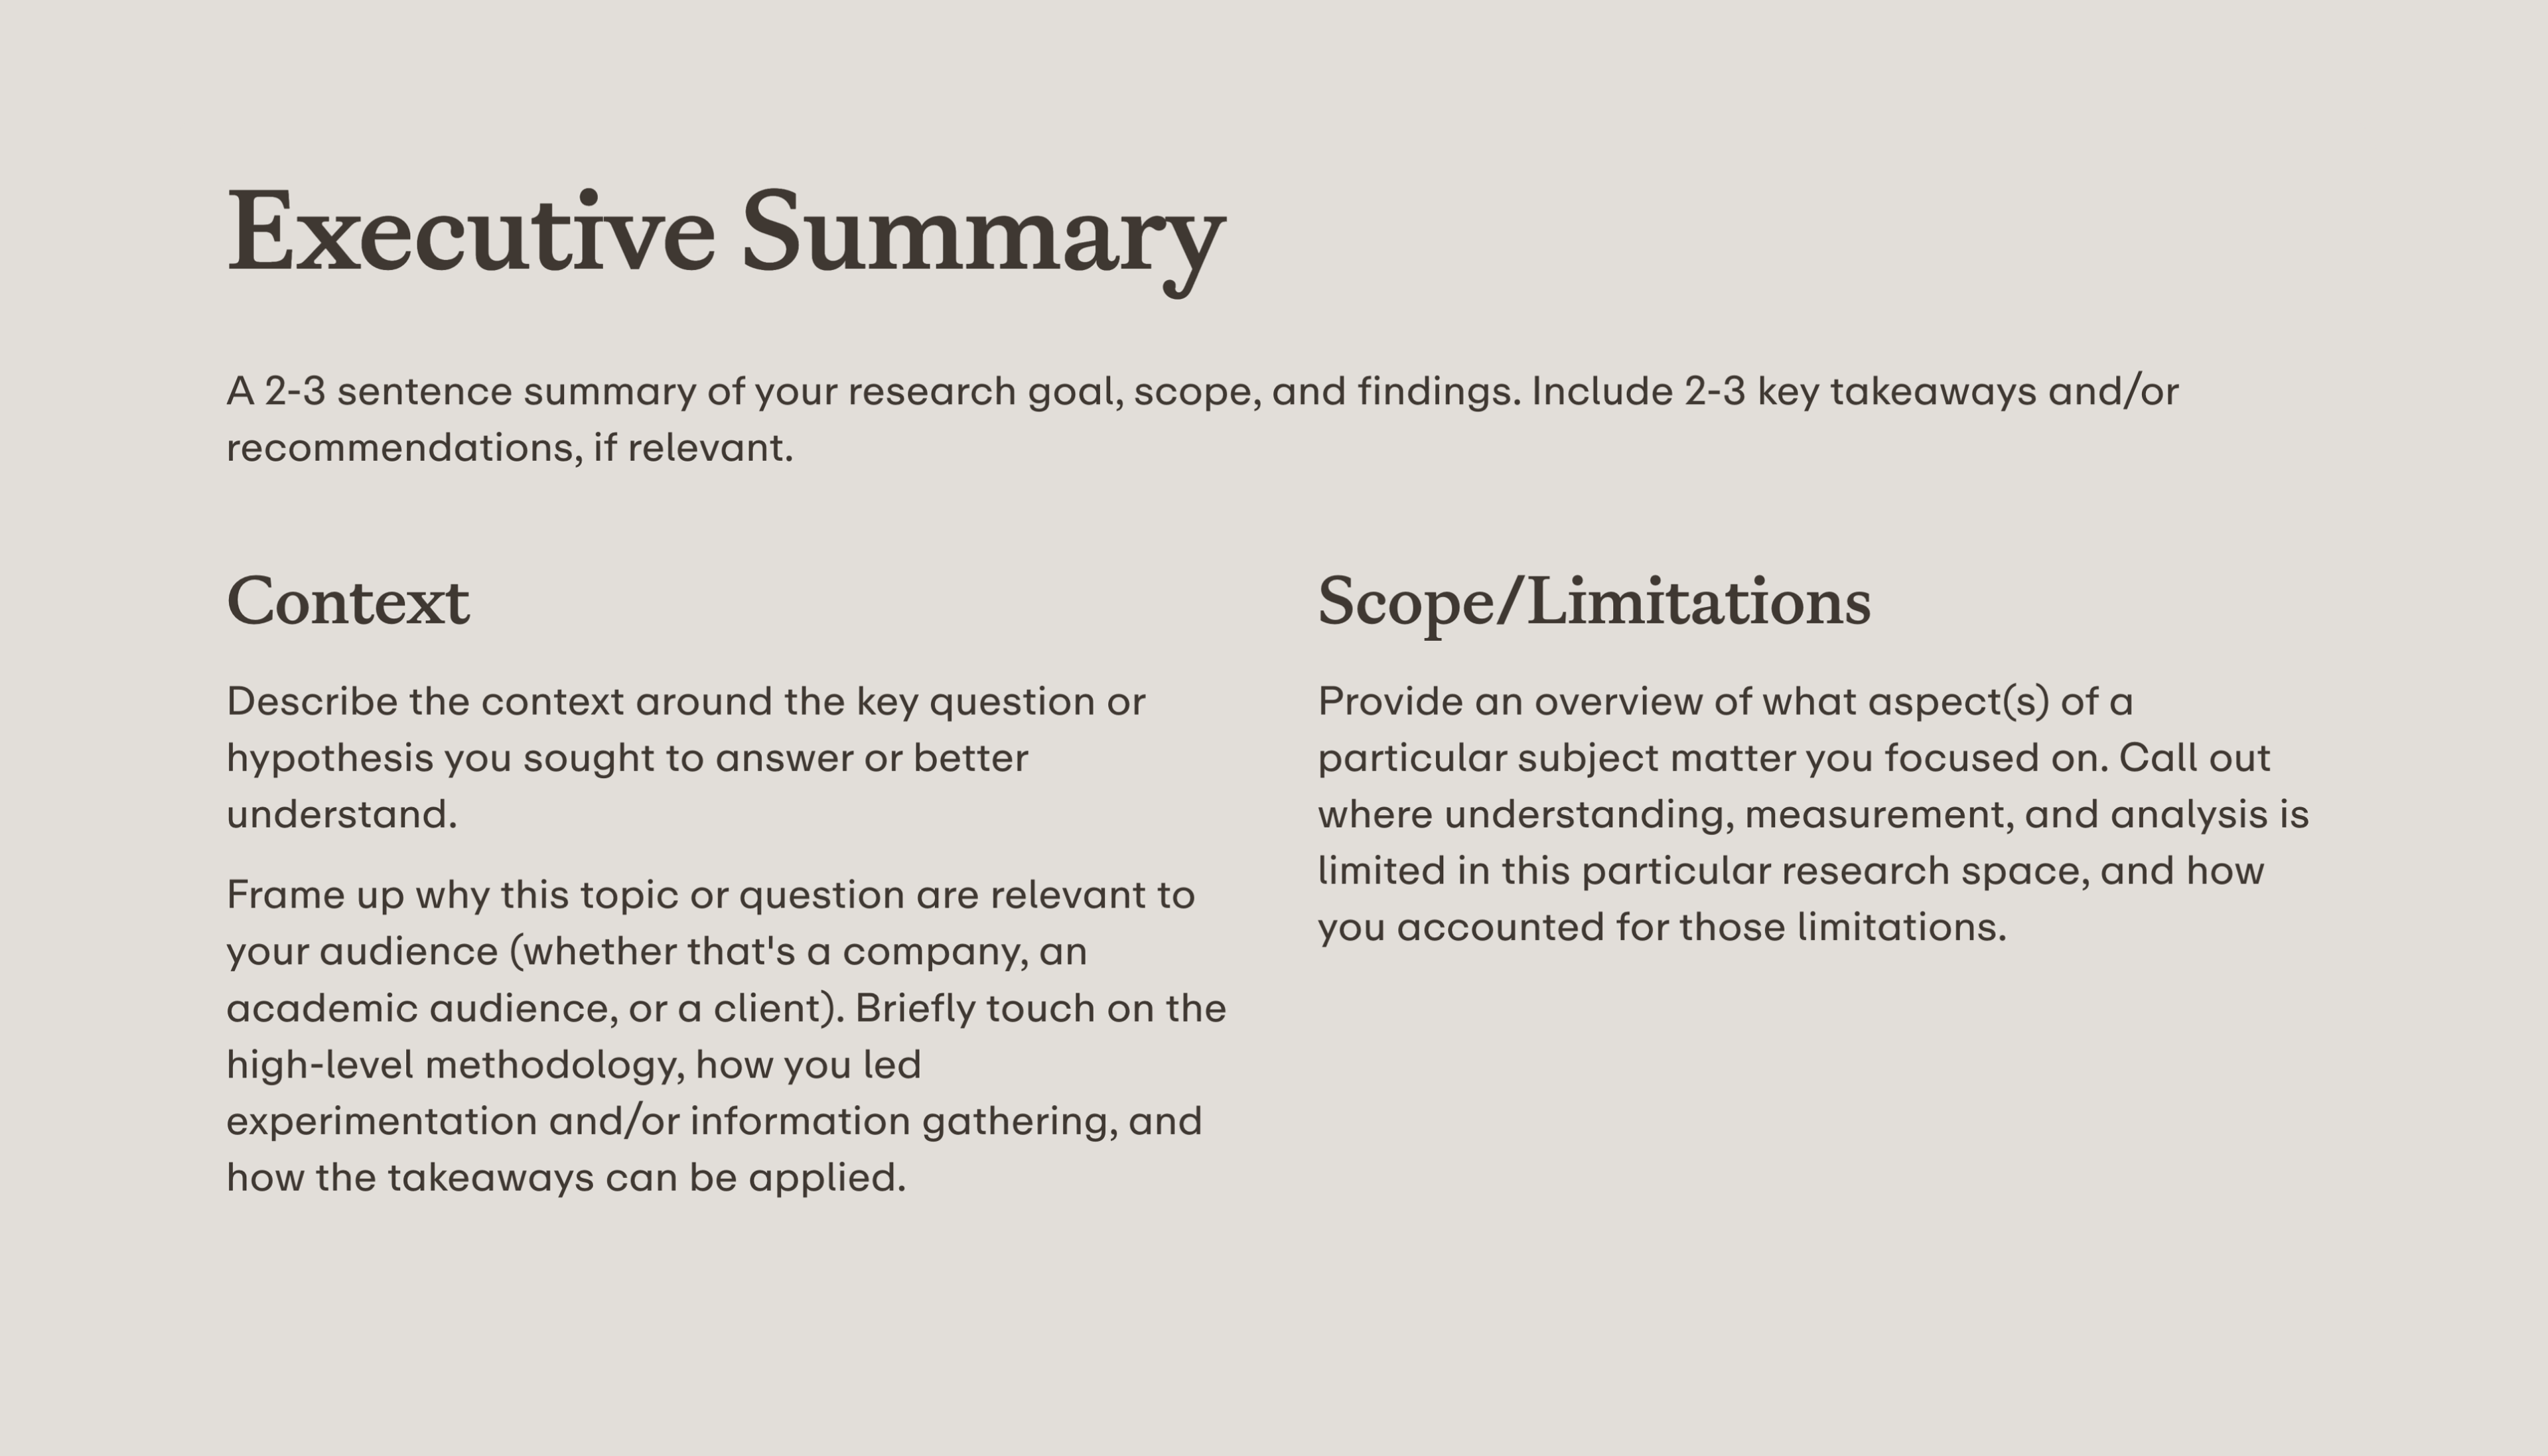 Research Report Template – Executive Summary Section